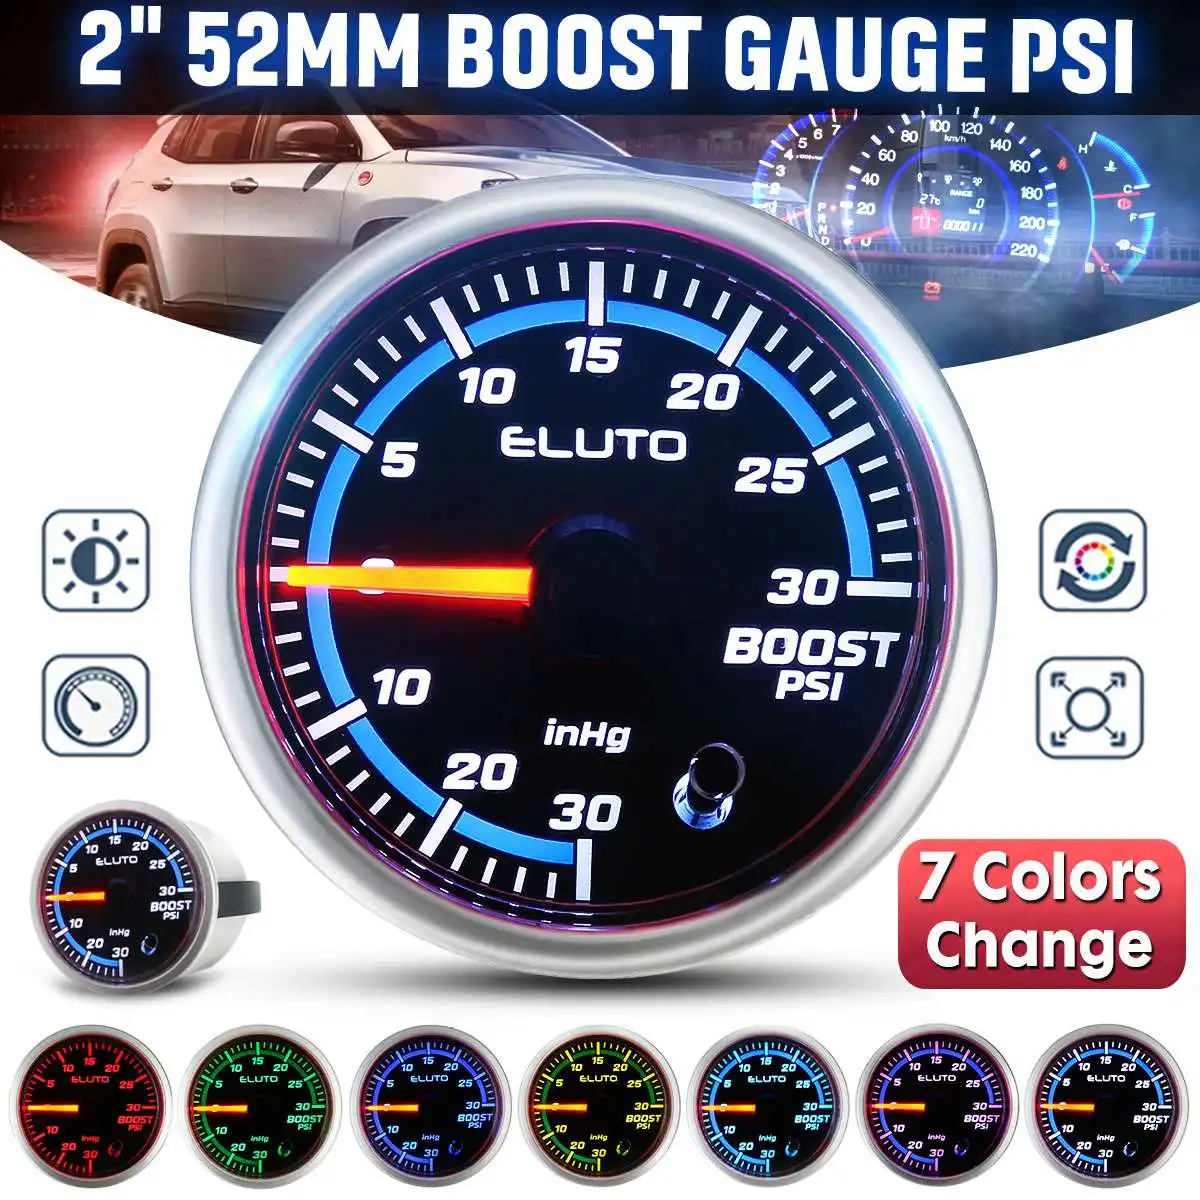 Universal 12V LED Digital Turbo Boost Gauge Meter Car Vehicle Modification Accessory 2 52mm Turbo Boost Gauge with 7 Color 